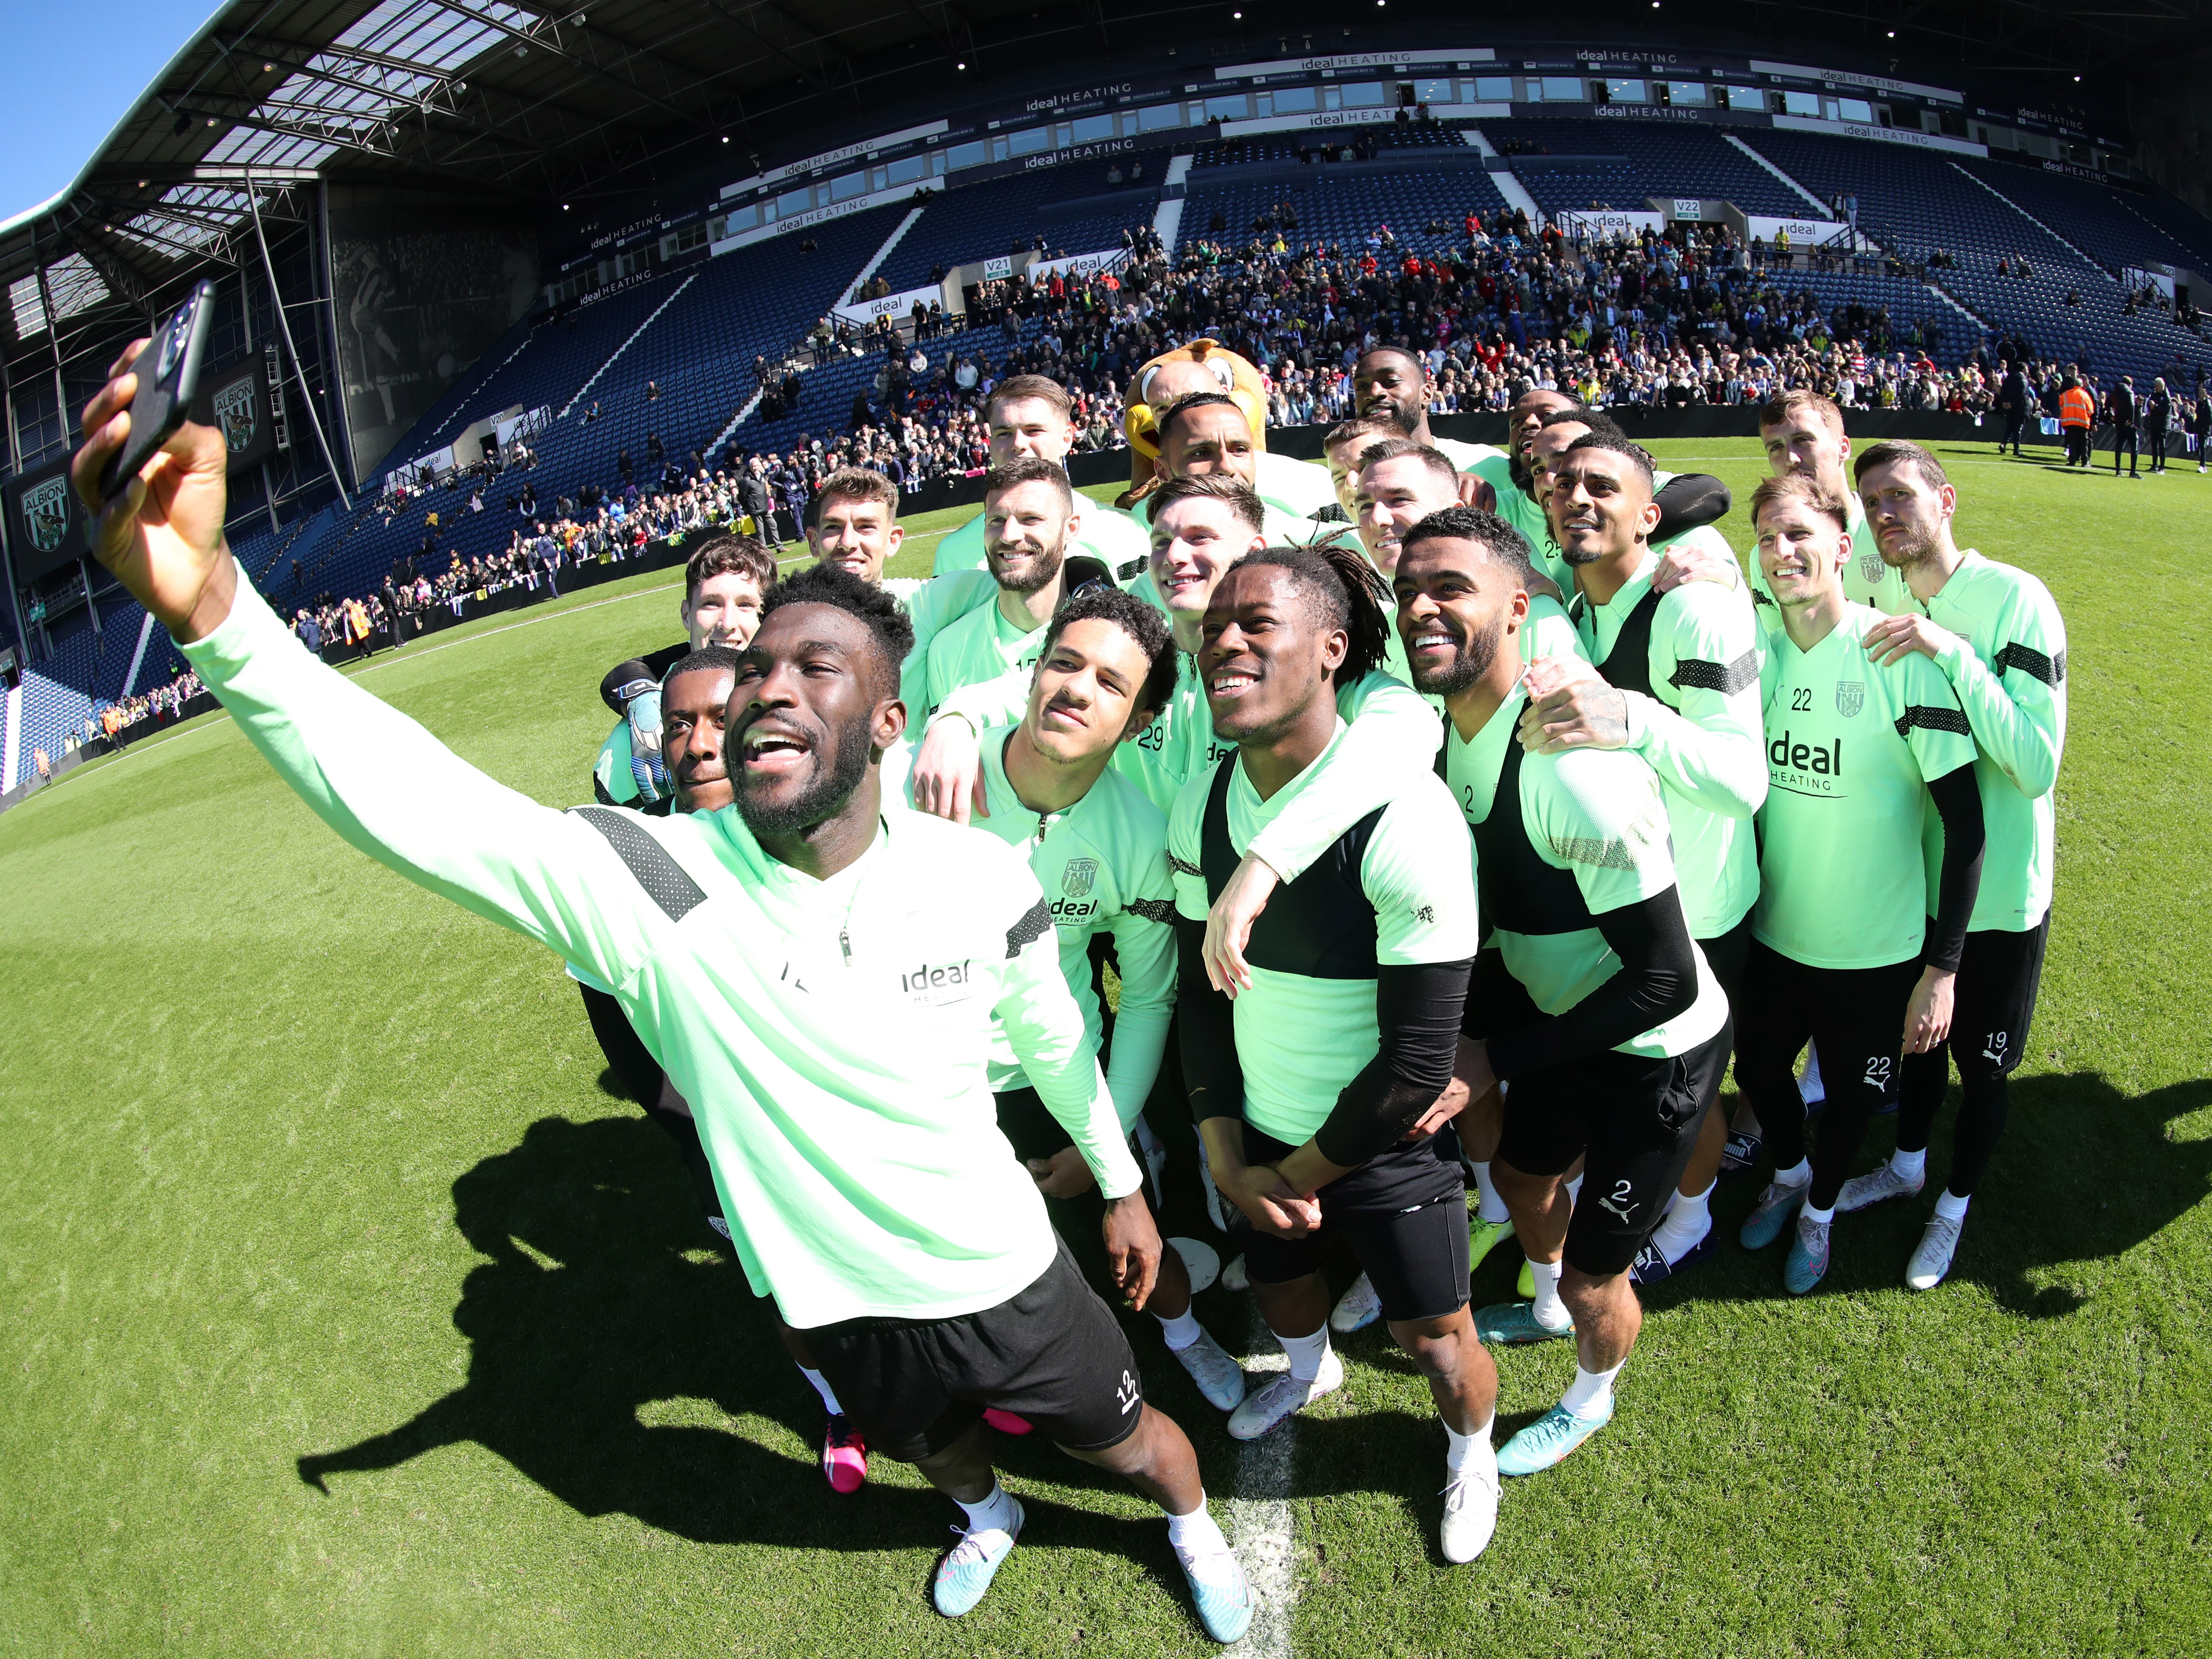 Albion players pose for a selfie at The Hawthorns in front of the East Stand